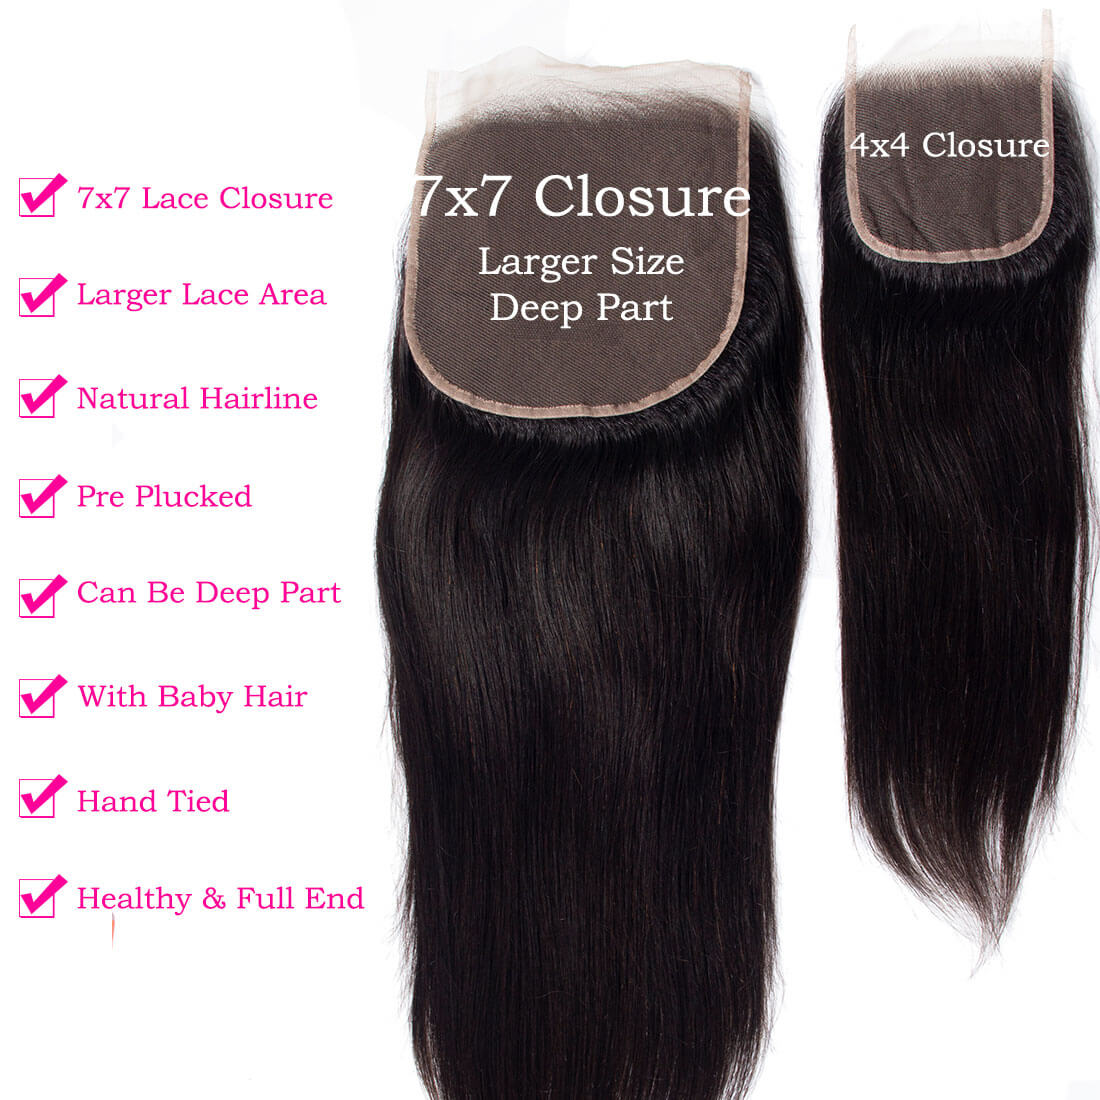 7x7 closure with bundles,7x7 lace closure straight,straight hair with 7x7 closure,bundles with 7x7 lace closure,7x7 closure with 3 bundles